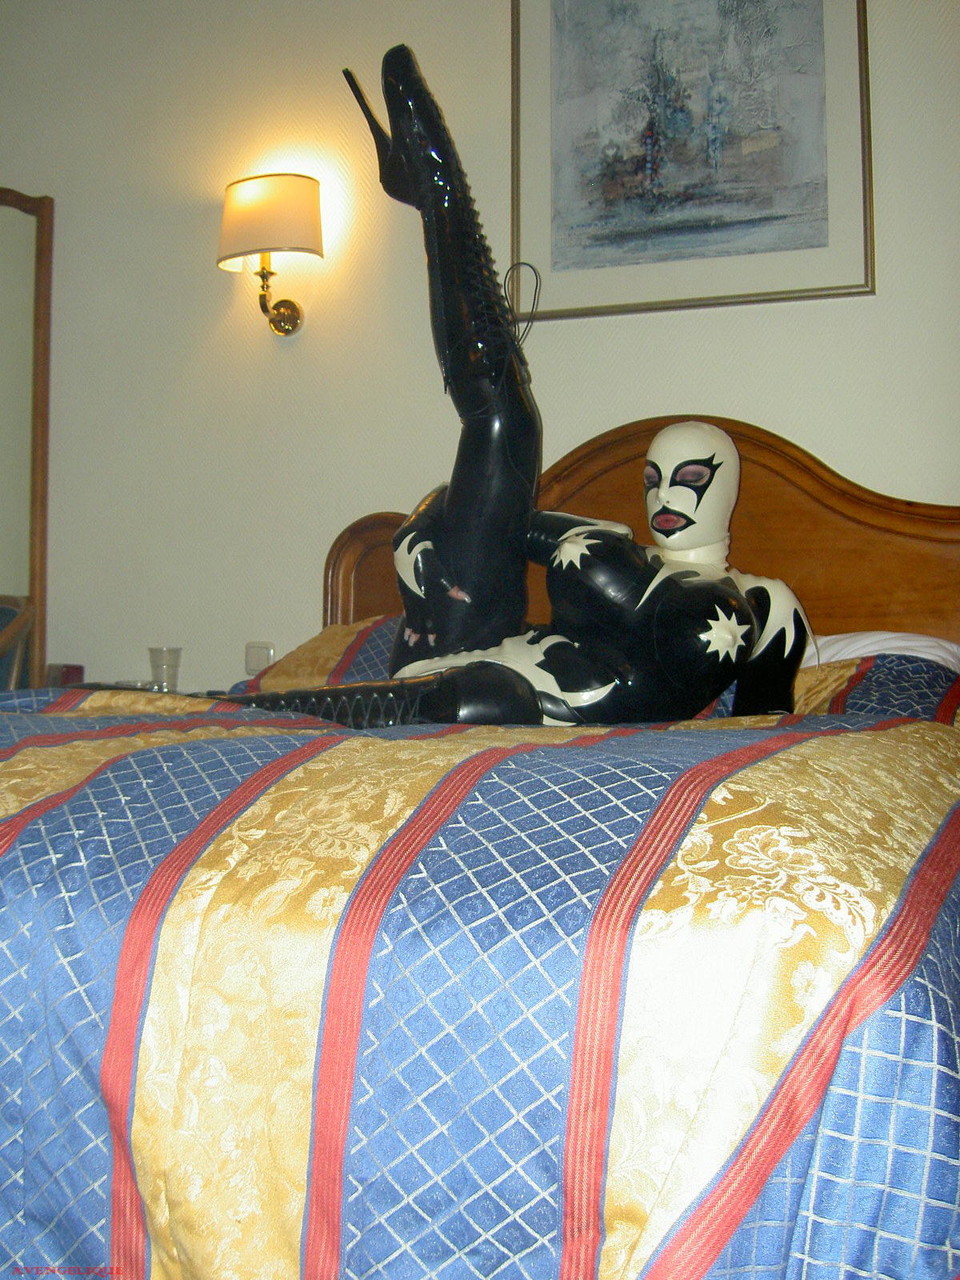 Fetish model Darkwing Zero poses on a hotel room bed in latex clothing foto porno #426050023 | Rubber Tits Pics, Darkwing Zero, Latex, porno mobile